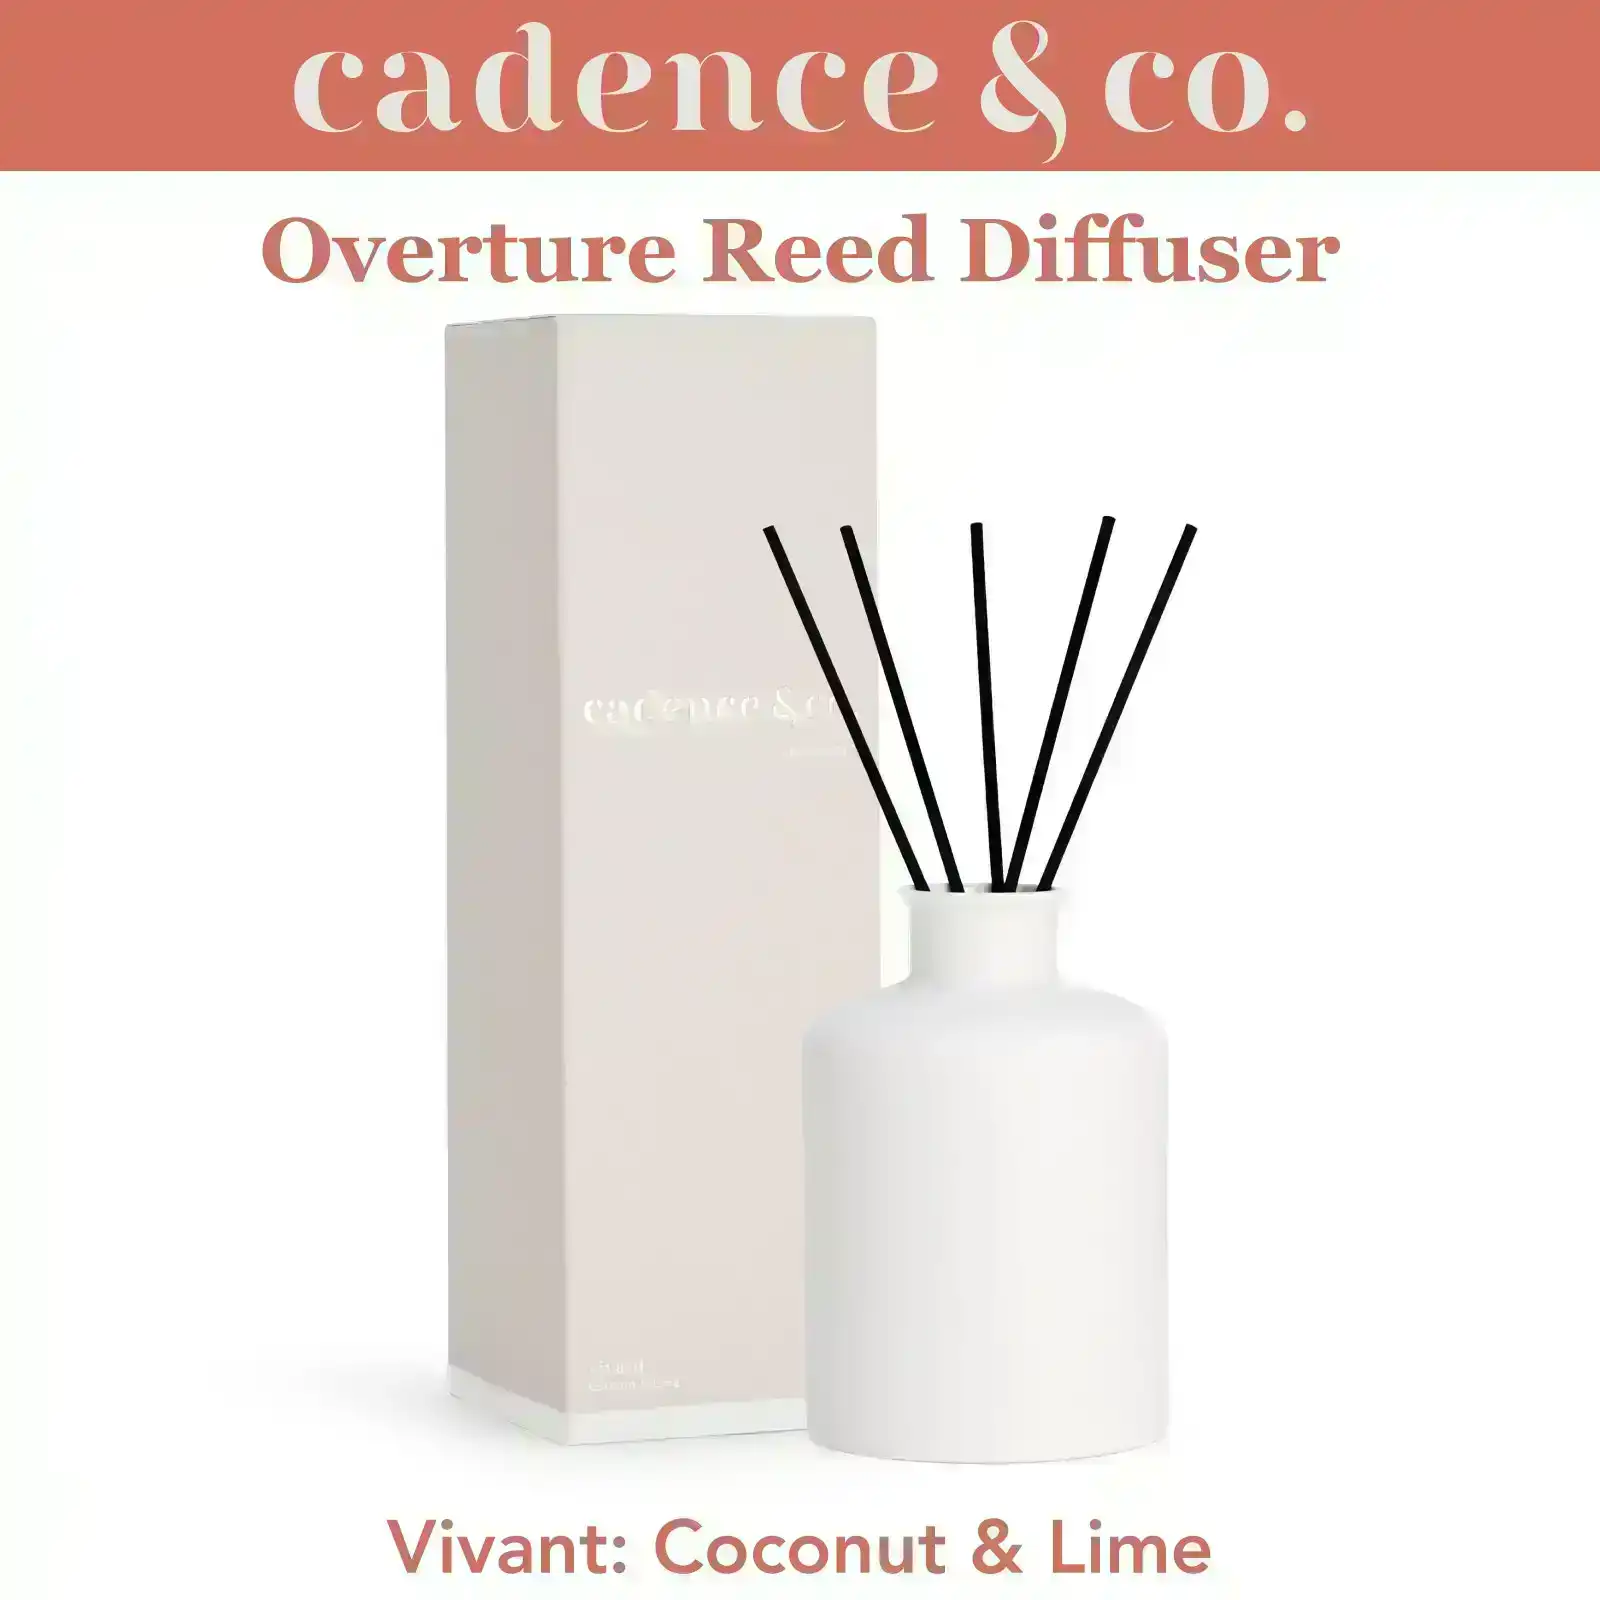 Cadence & Co Overture Reed Diffuser Vivant: Coconut & Lime Natural Room Freshener w/ Essential Oils